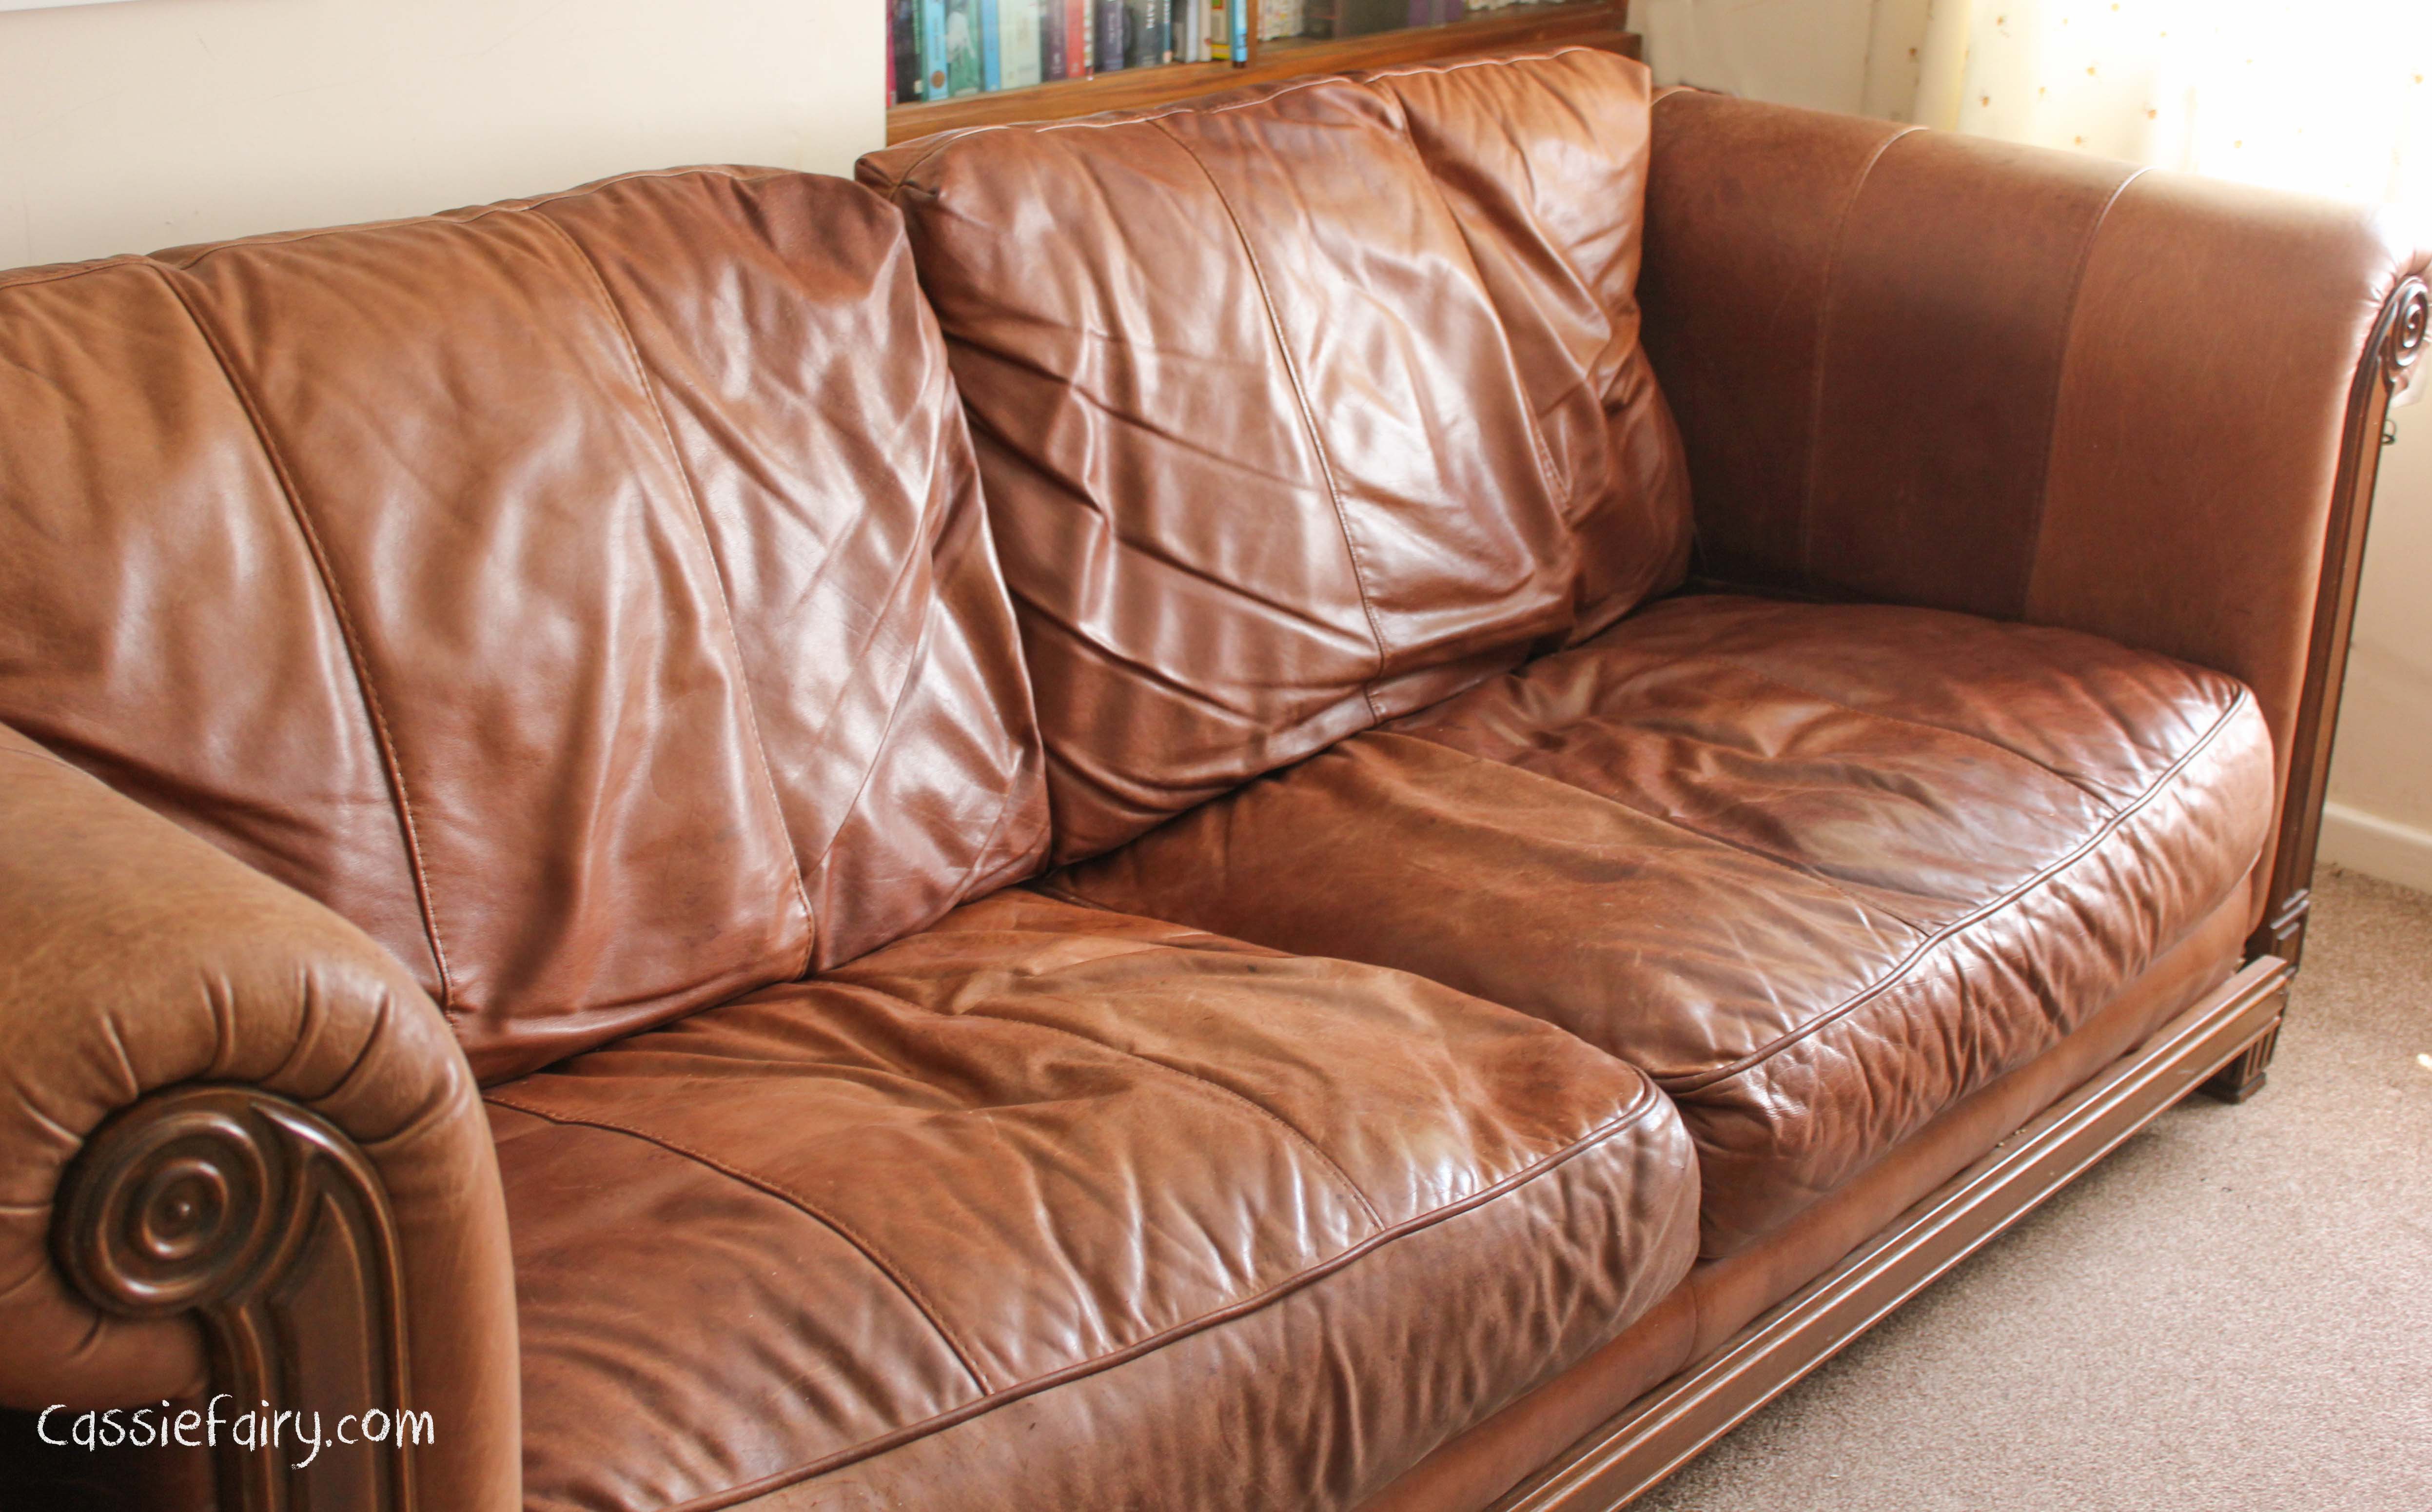 Ideas to spruce up your old sofa |